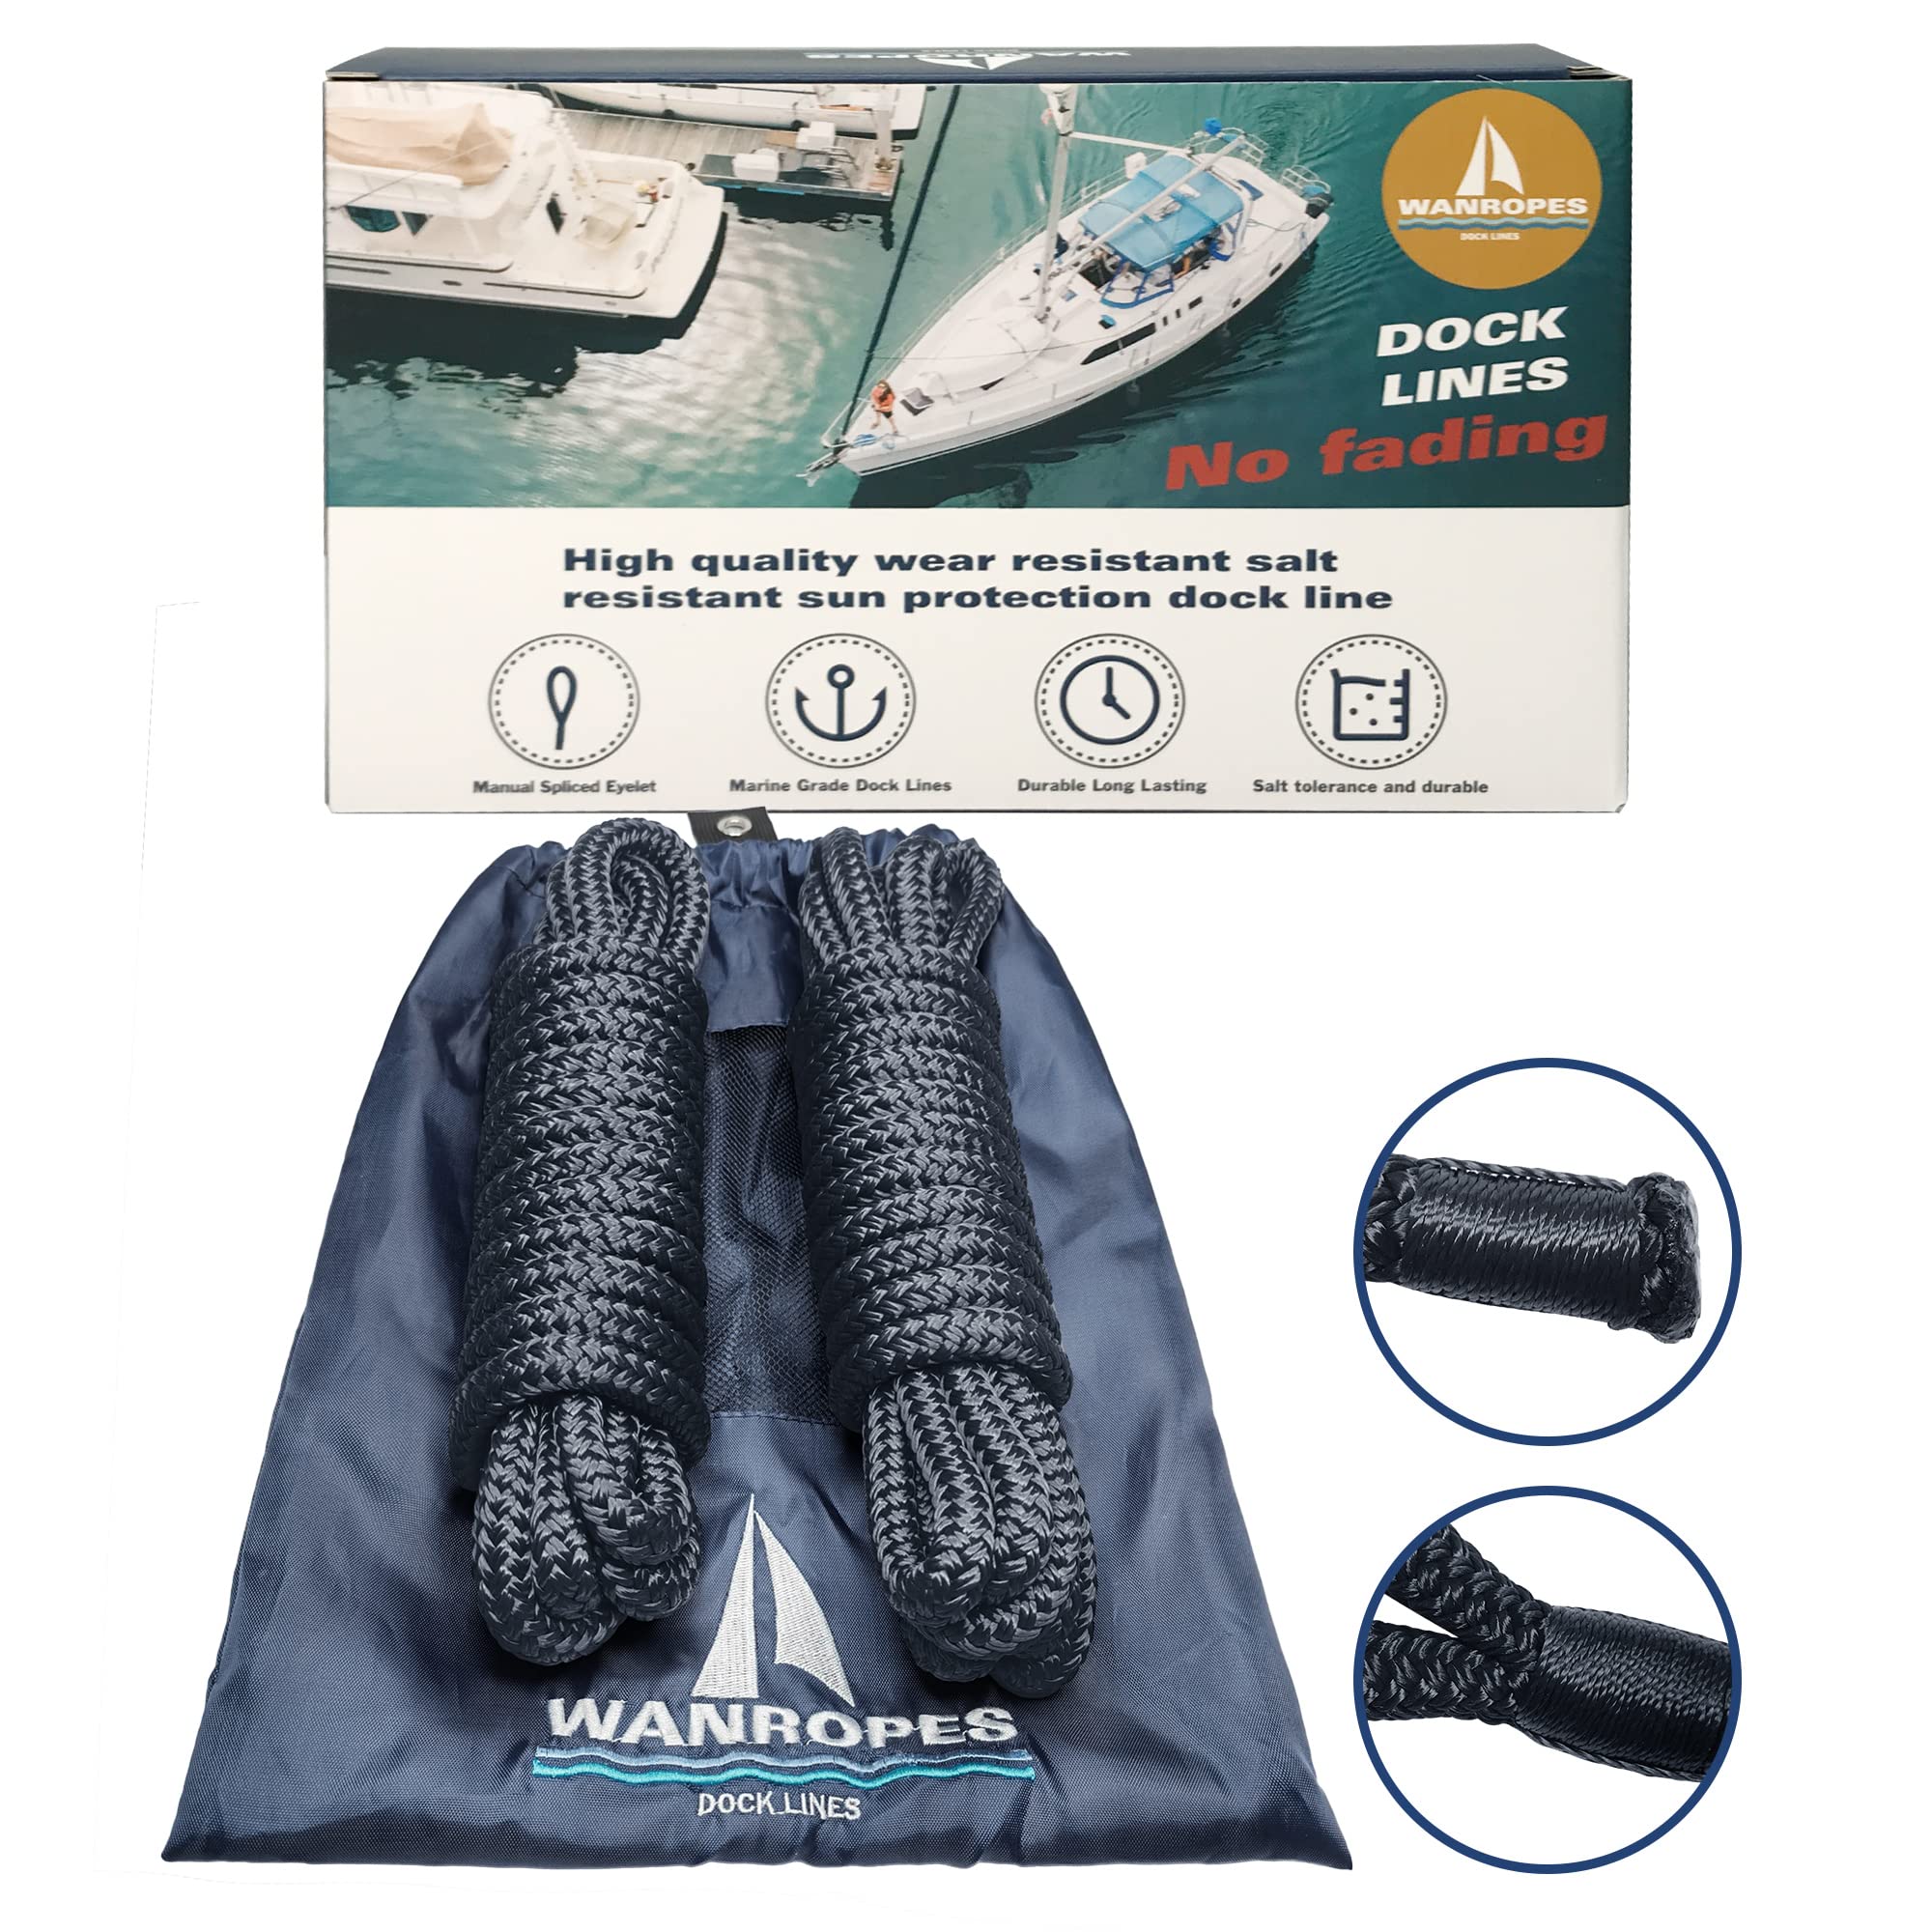 Wanropes Dock Lines Boat Ropes for Docking 1/2 15FT Double Braided Nylon Mooring  Marine Rope Boat 2 Pack for Boats, Marine Rope, Small Boat Accessories 1/2x15'  (2PK)